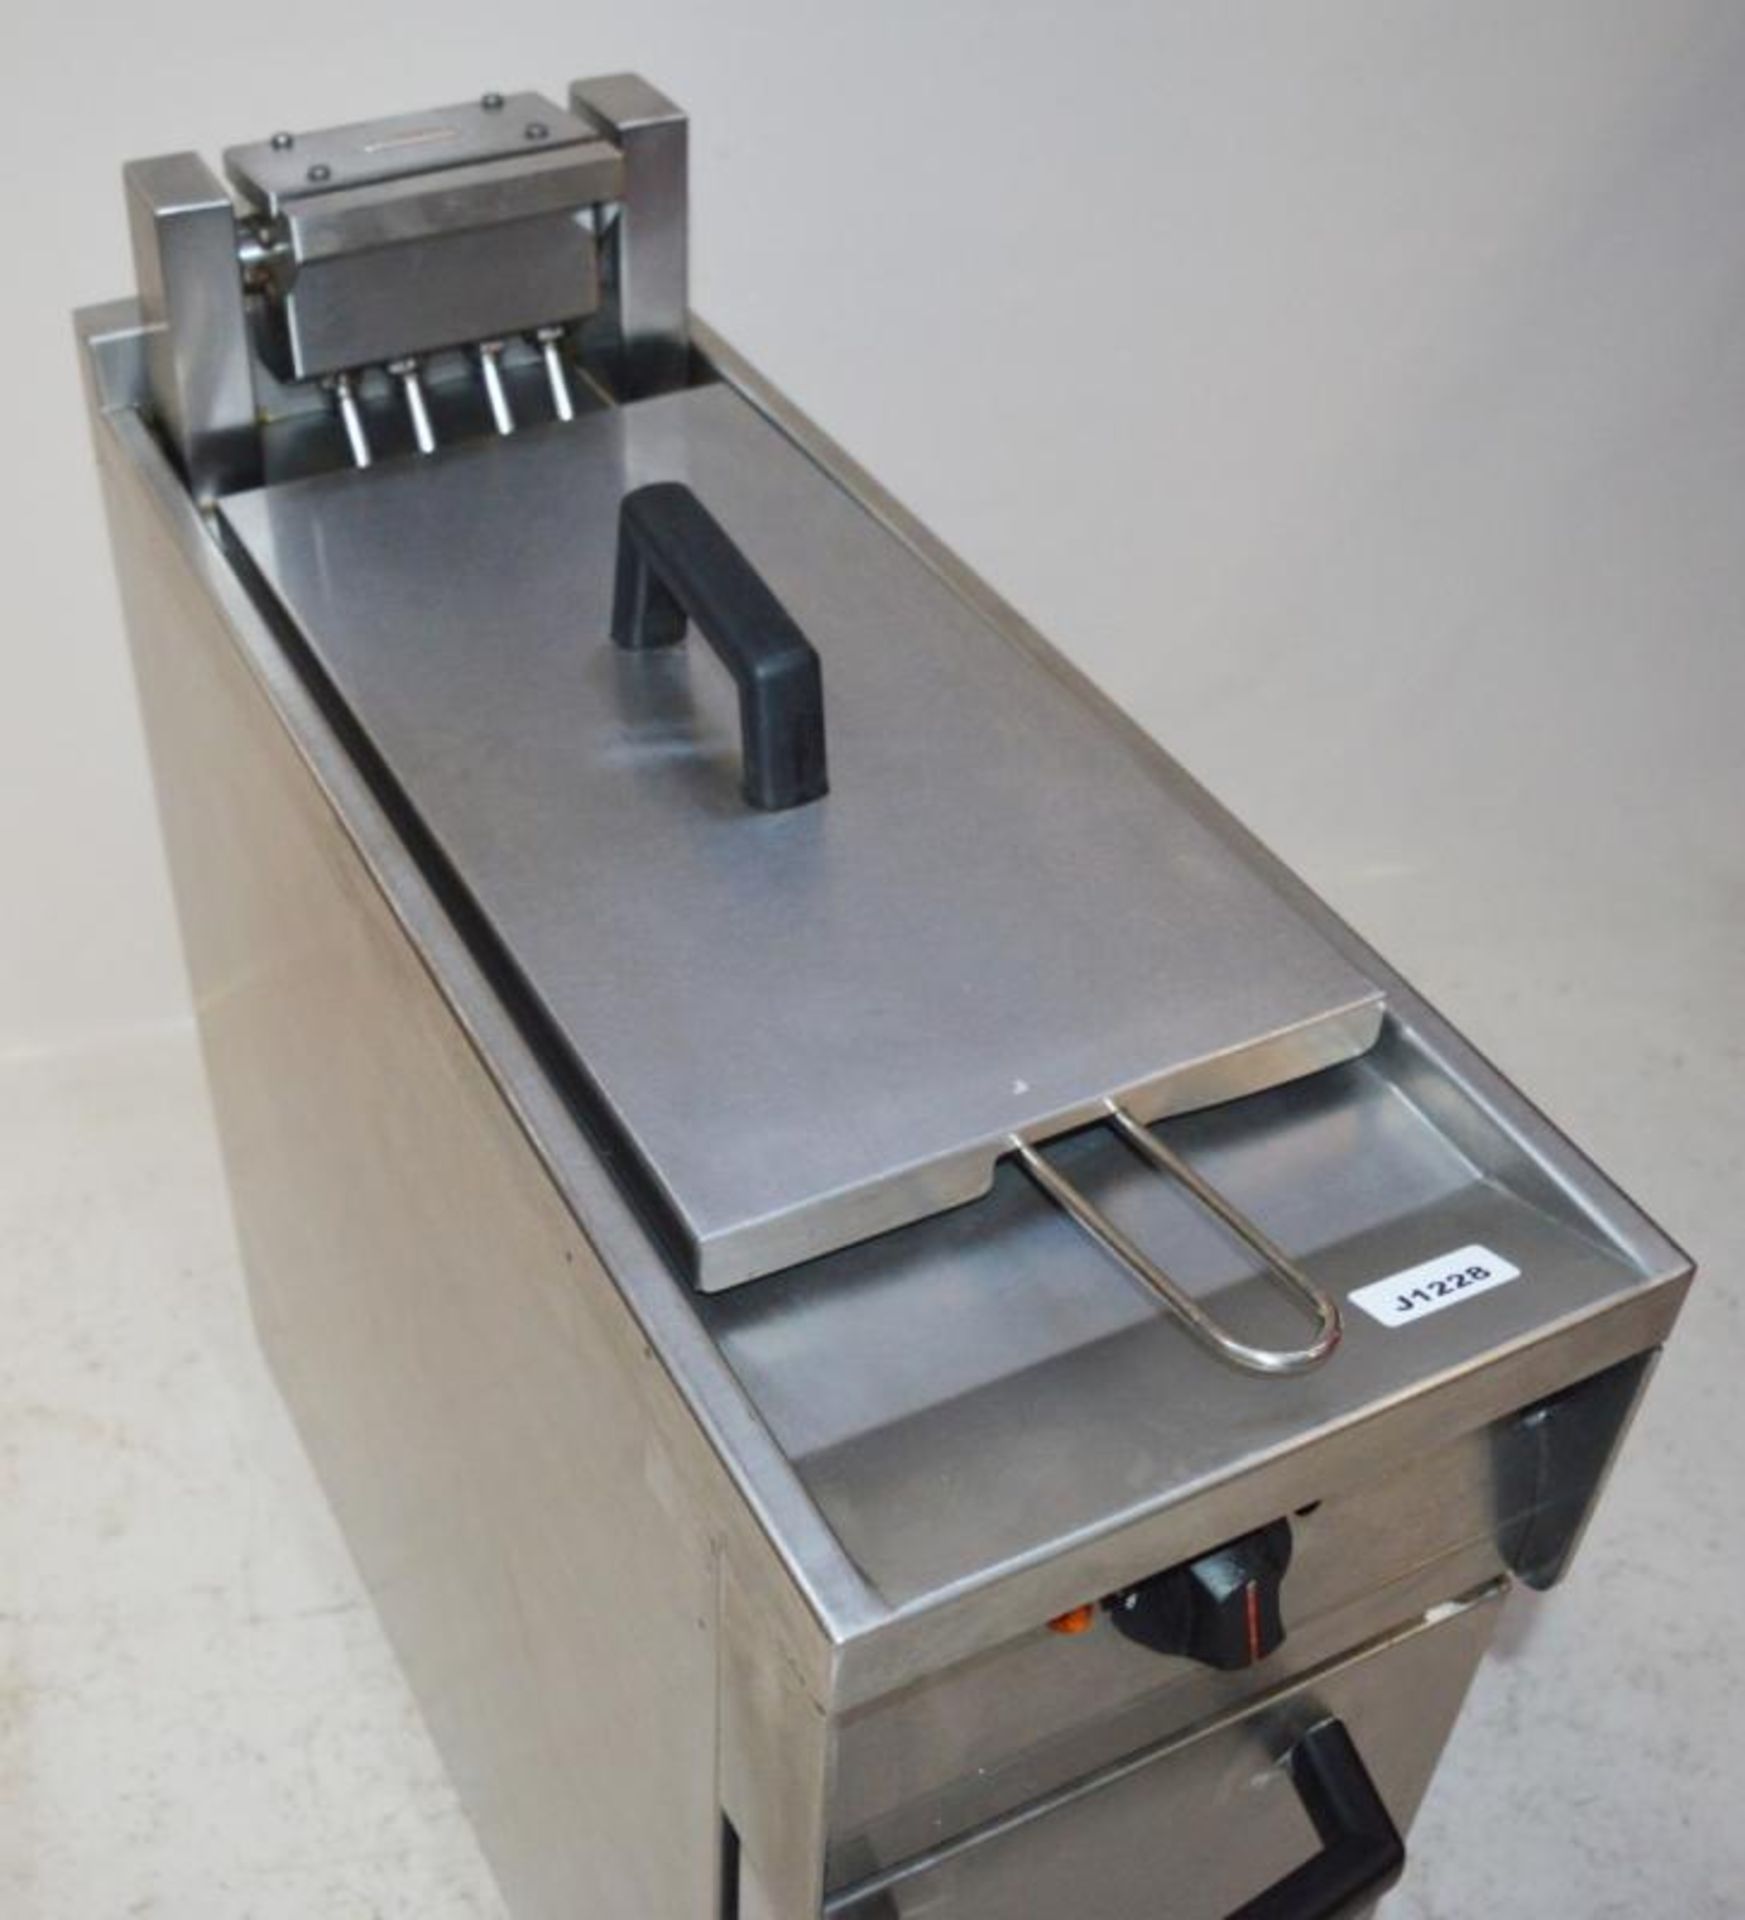 1 x Falcon Dominator E1830 Electric 3 Phase Fryer Cooker - Stainless Steel - H84 x W30 x D77 cms - C - Image 4 of 13